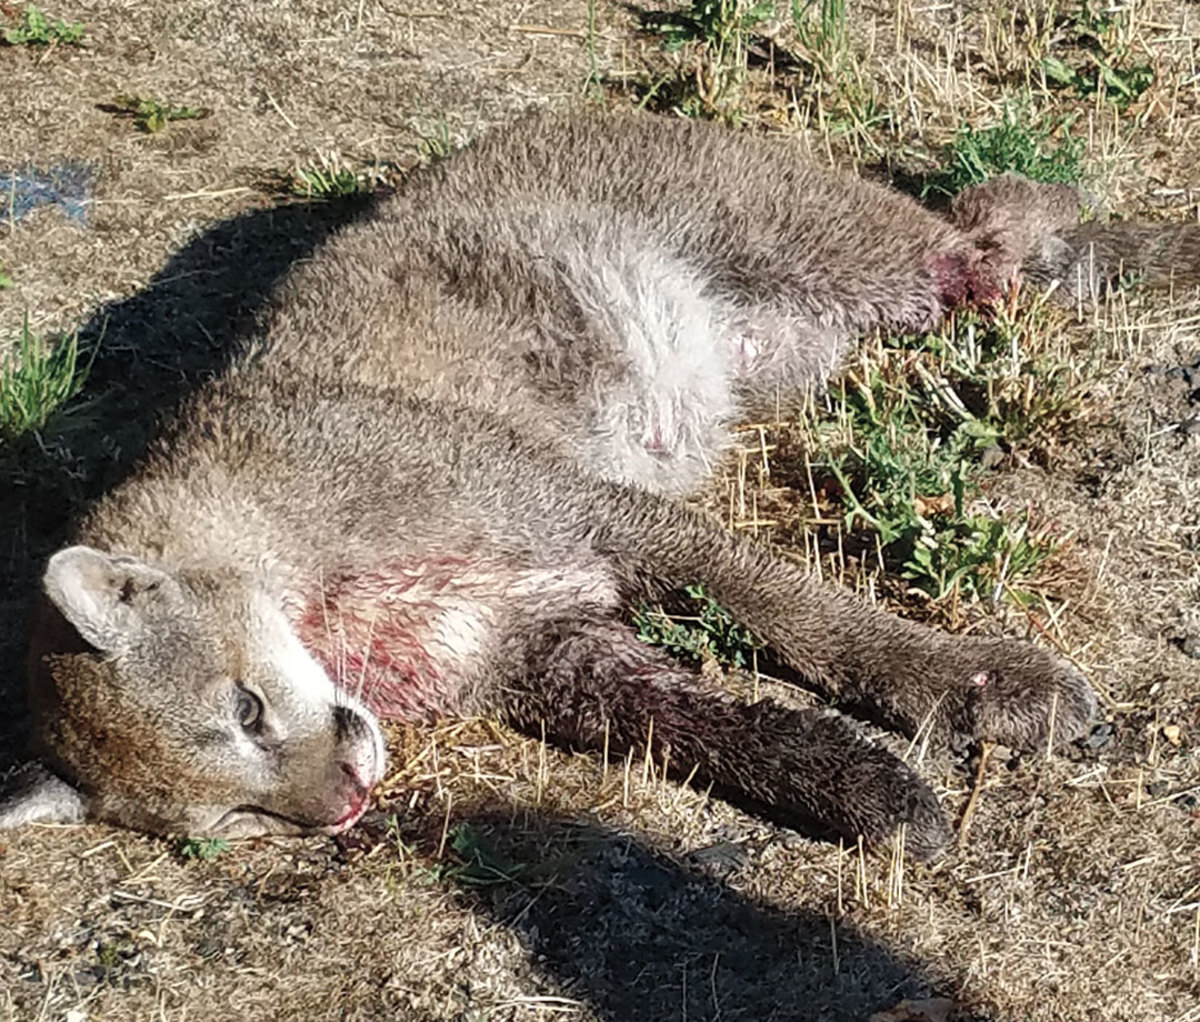 Catalyst: After this cougar was killed, the hunts began in earnest.